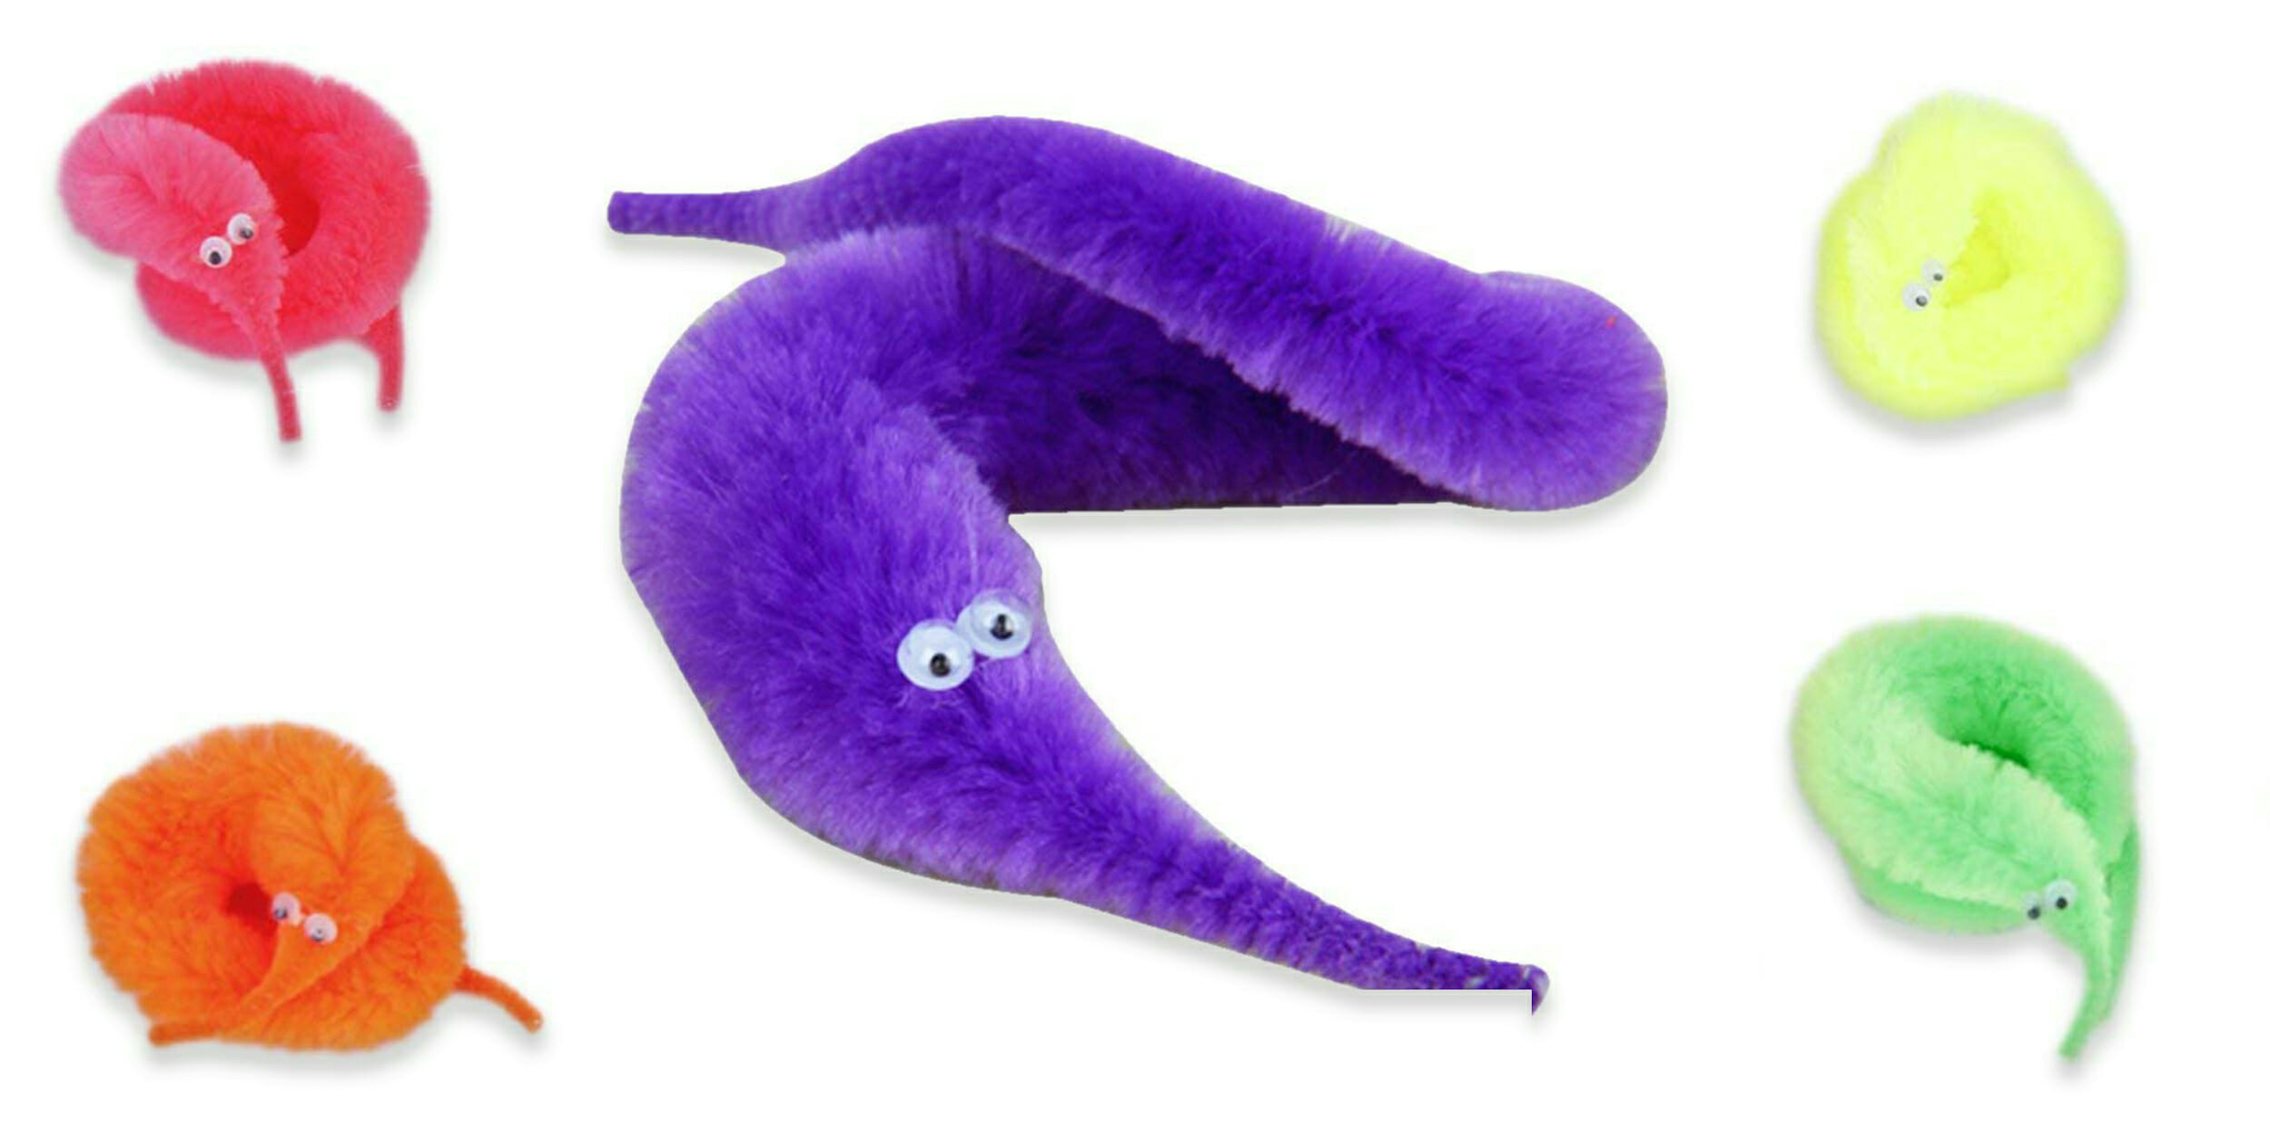 worm on a string toy